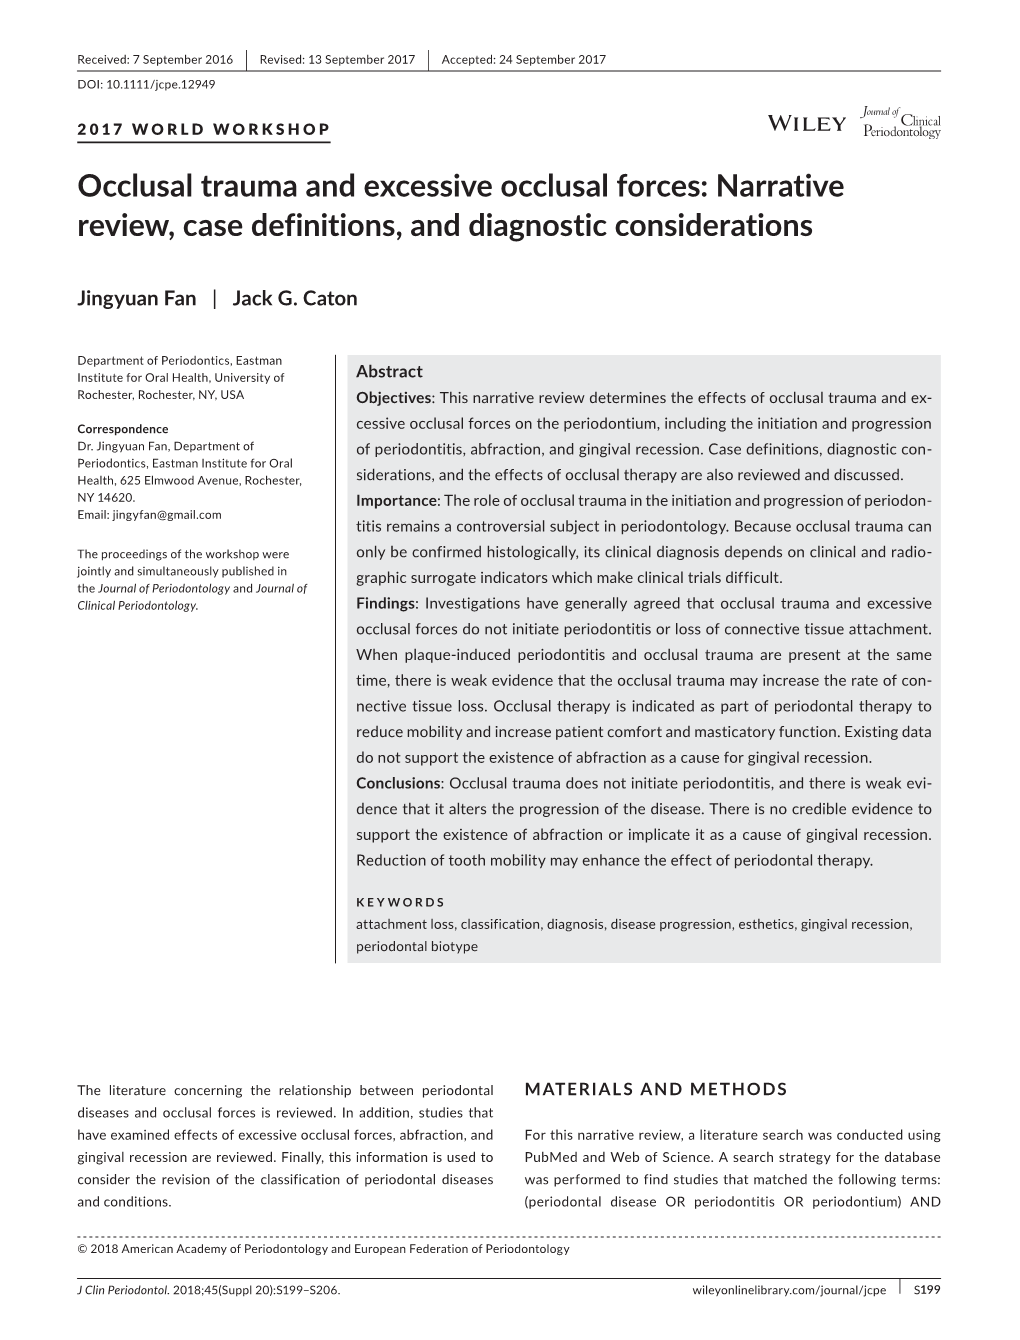 Occlusal Trauma and Excessive Occlusal Forces: Narrative Review, Case Definitions, and Diagnostic Considerations